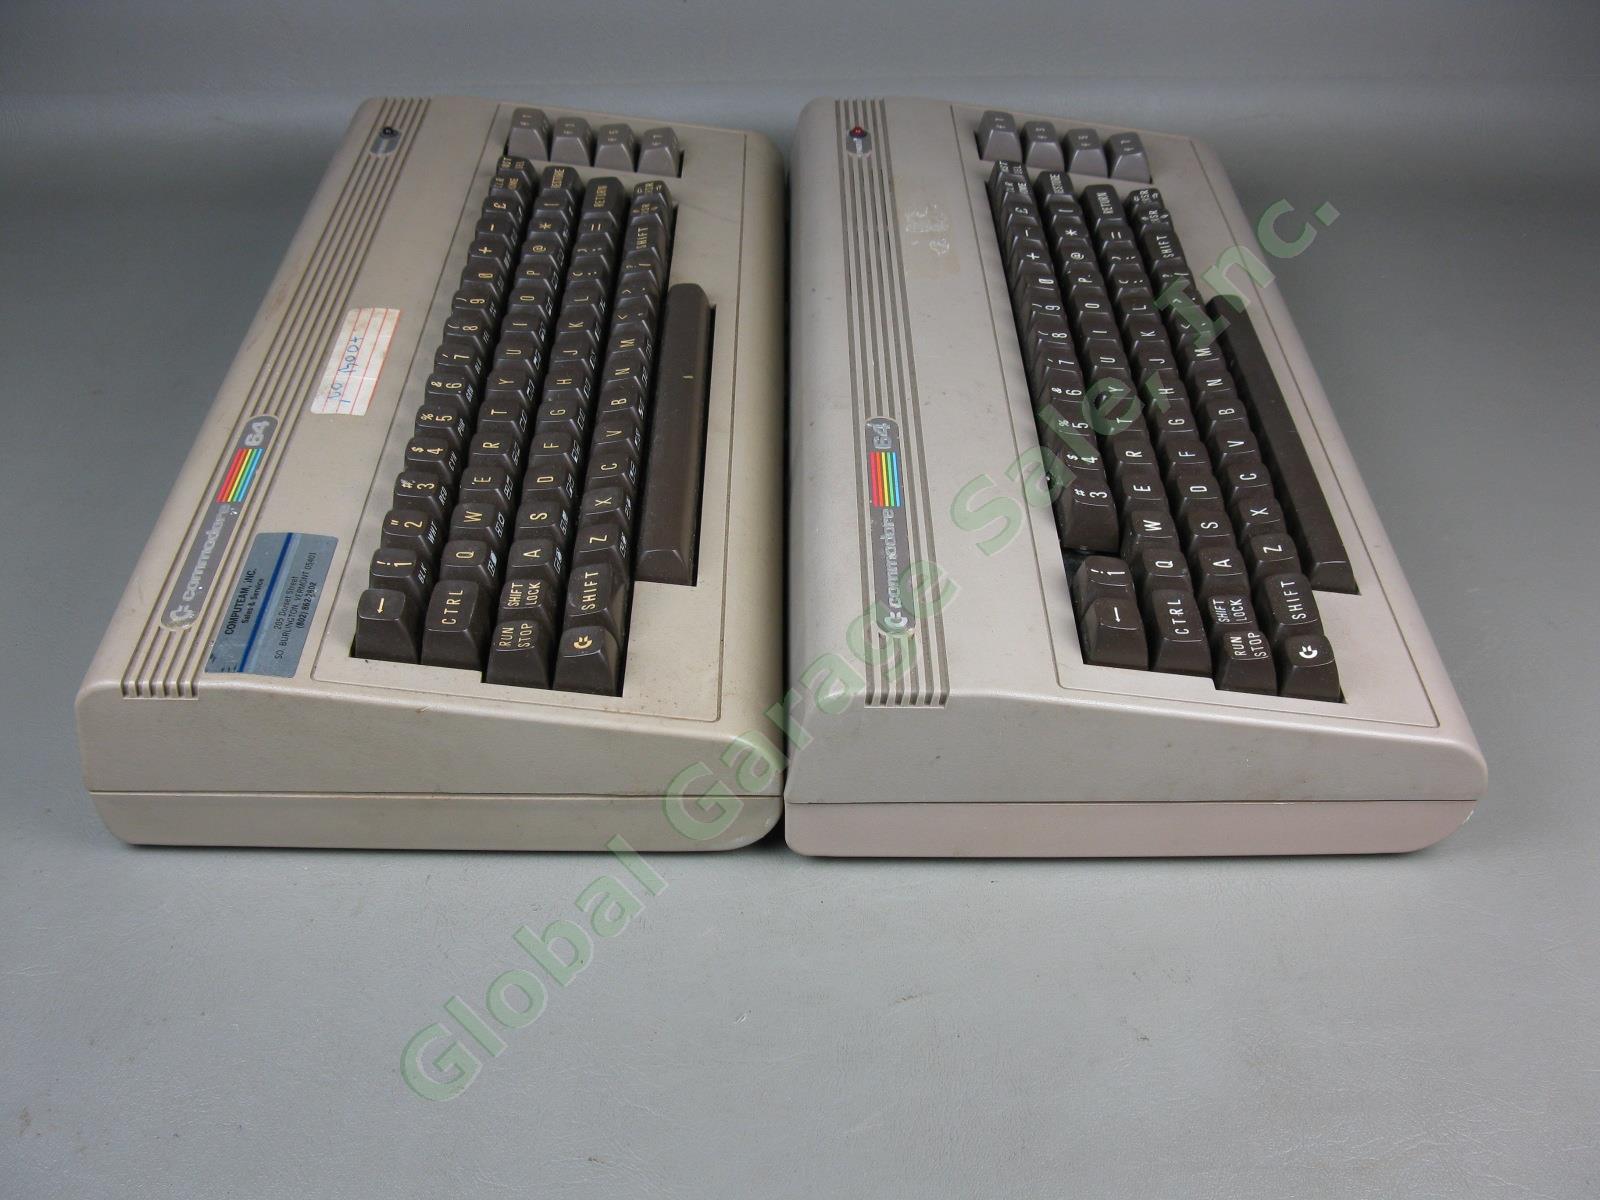 2 Vtg Commodore 64 Personal Computers Lot Untested As-Is Parts/Repair No Power?? 5